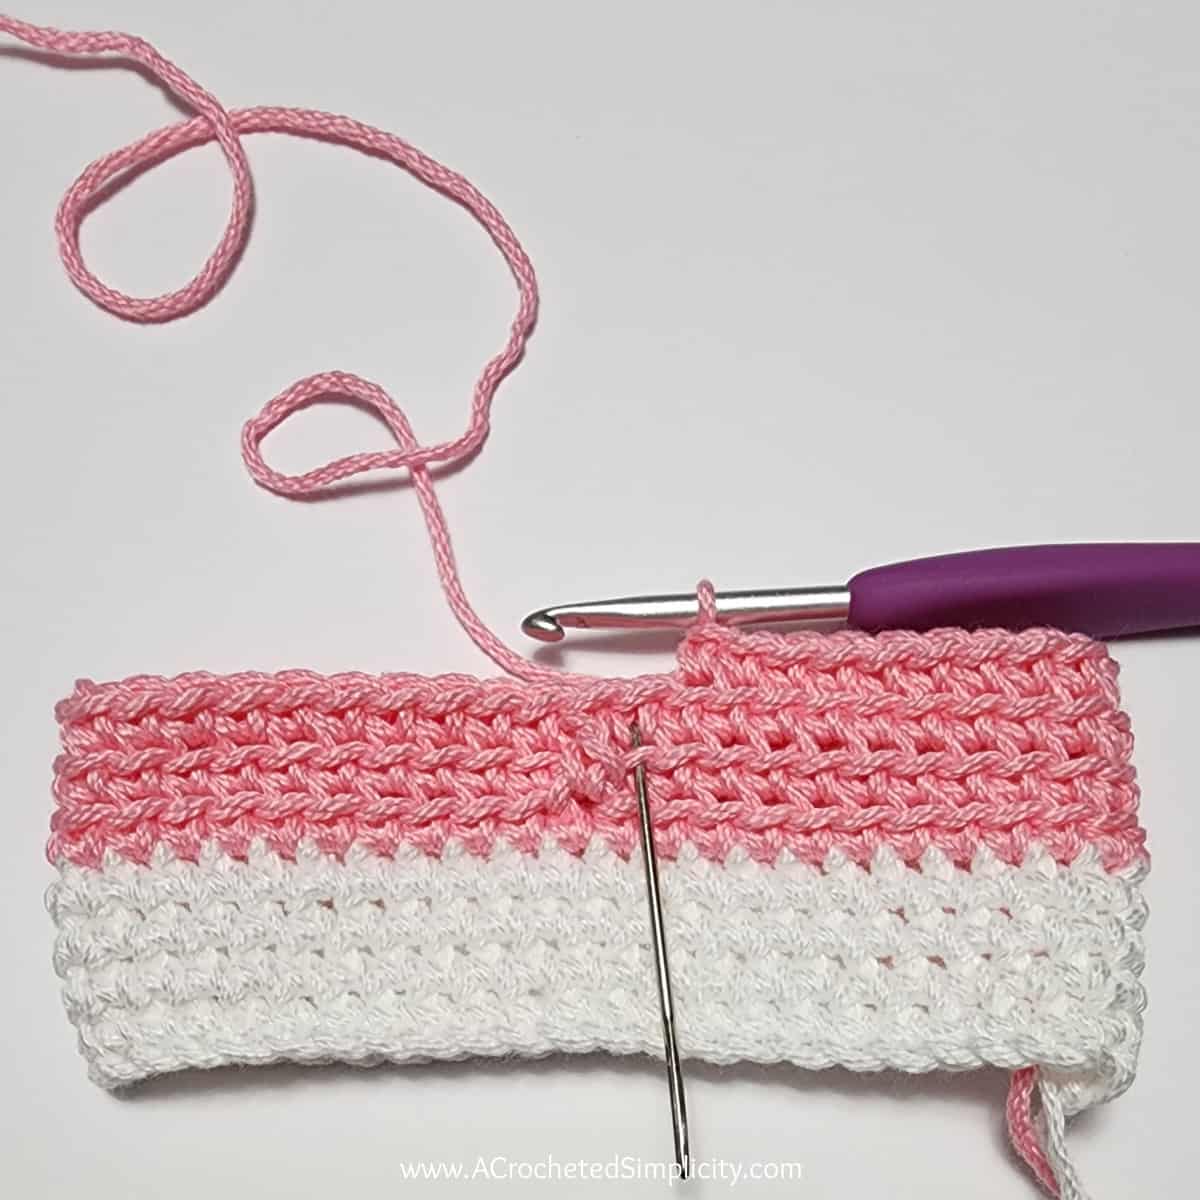 Crochet Valentine's Day treat bag tutorial photo in pink and white yarn showing where to work the next in round 2.